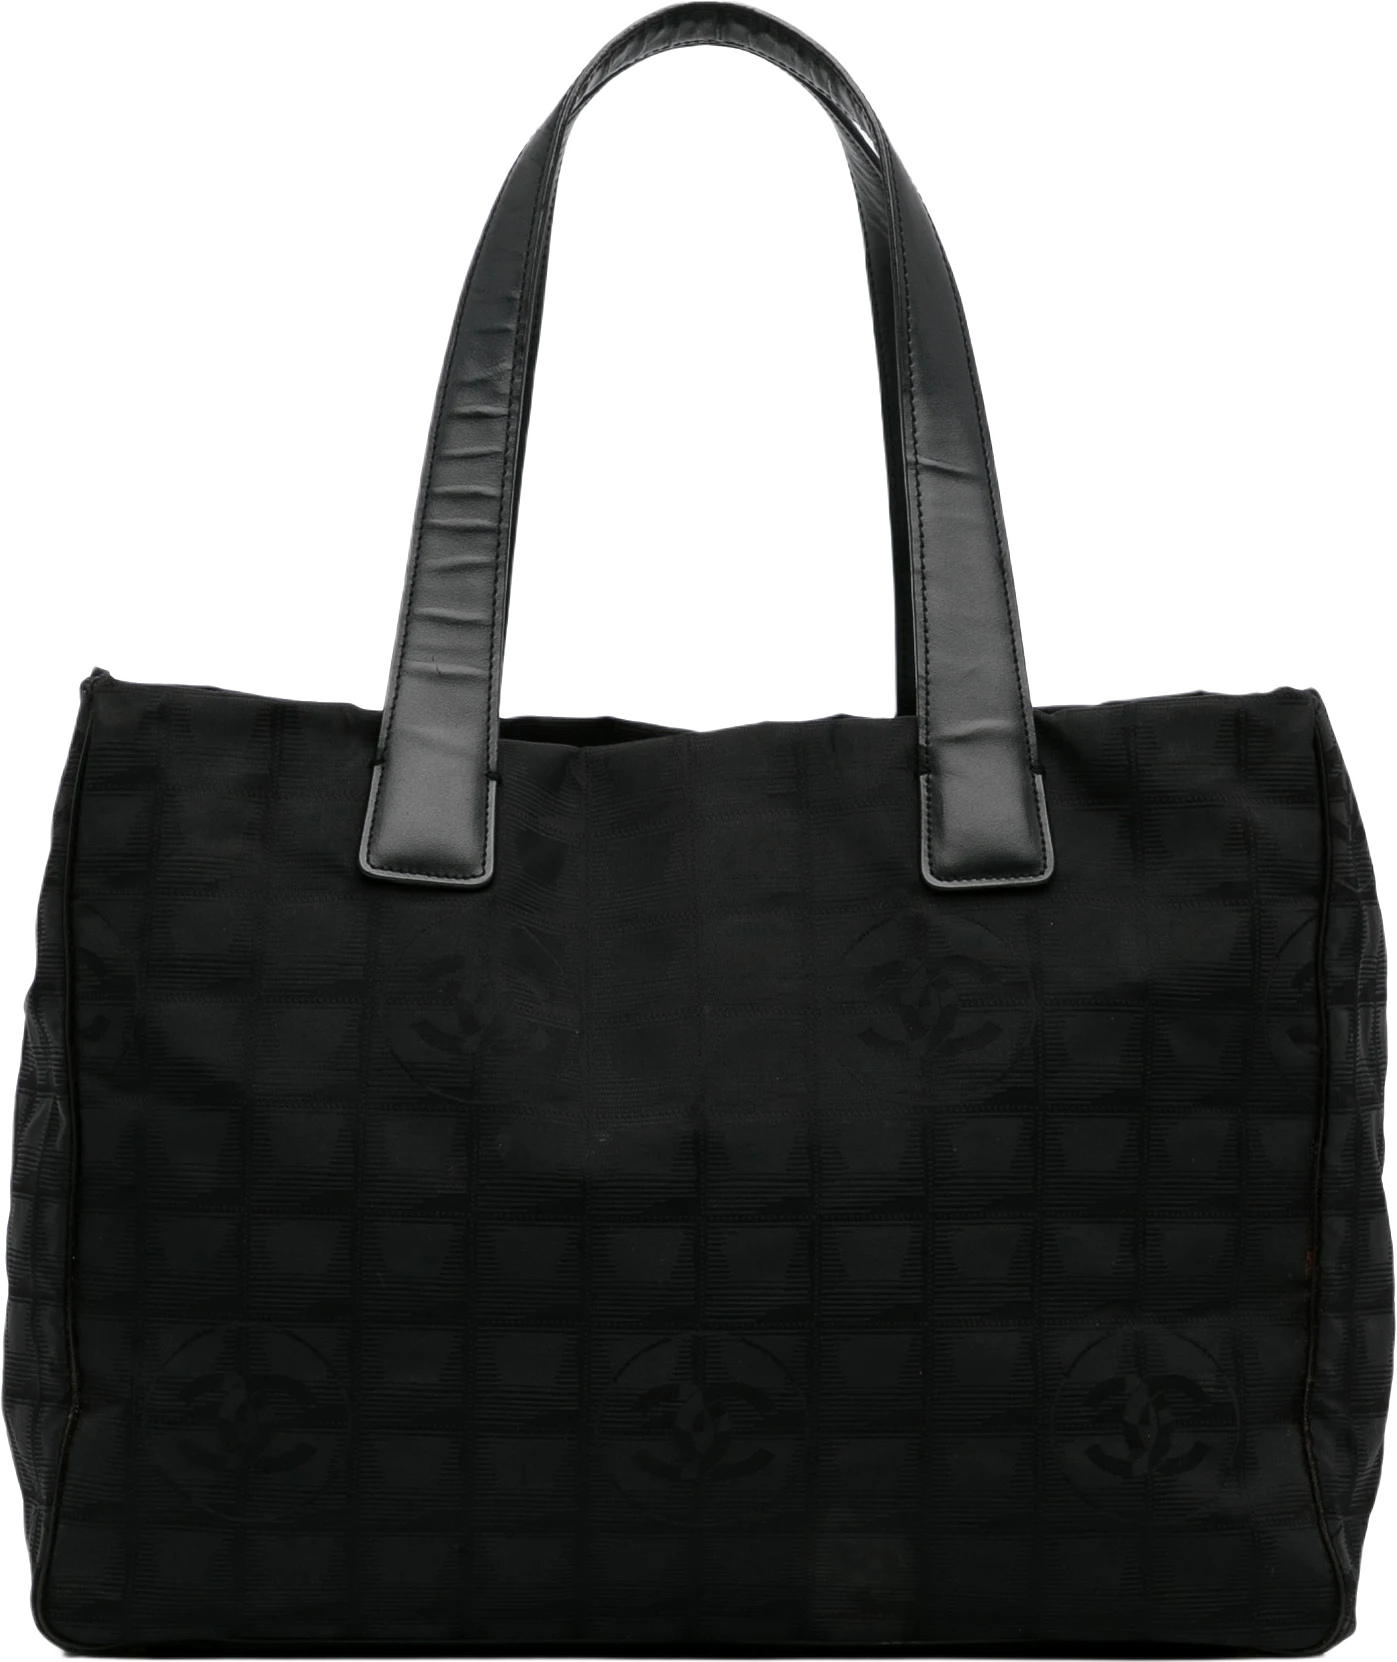 Chanel New Travel Line Tote